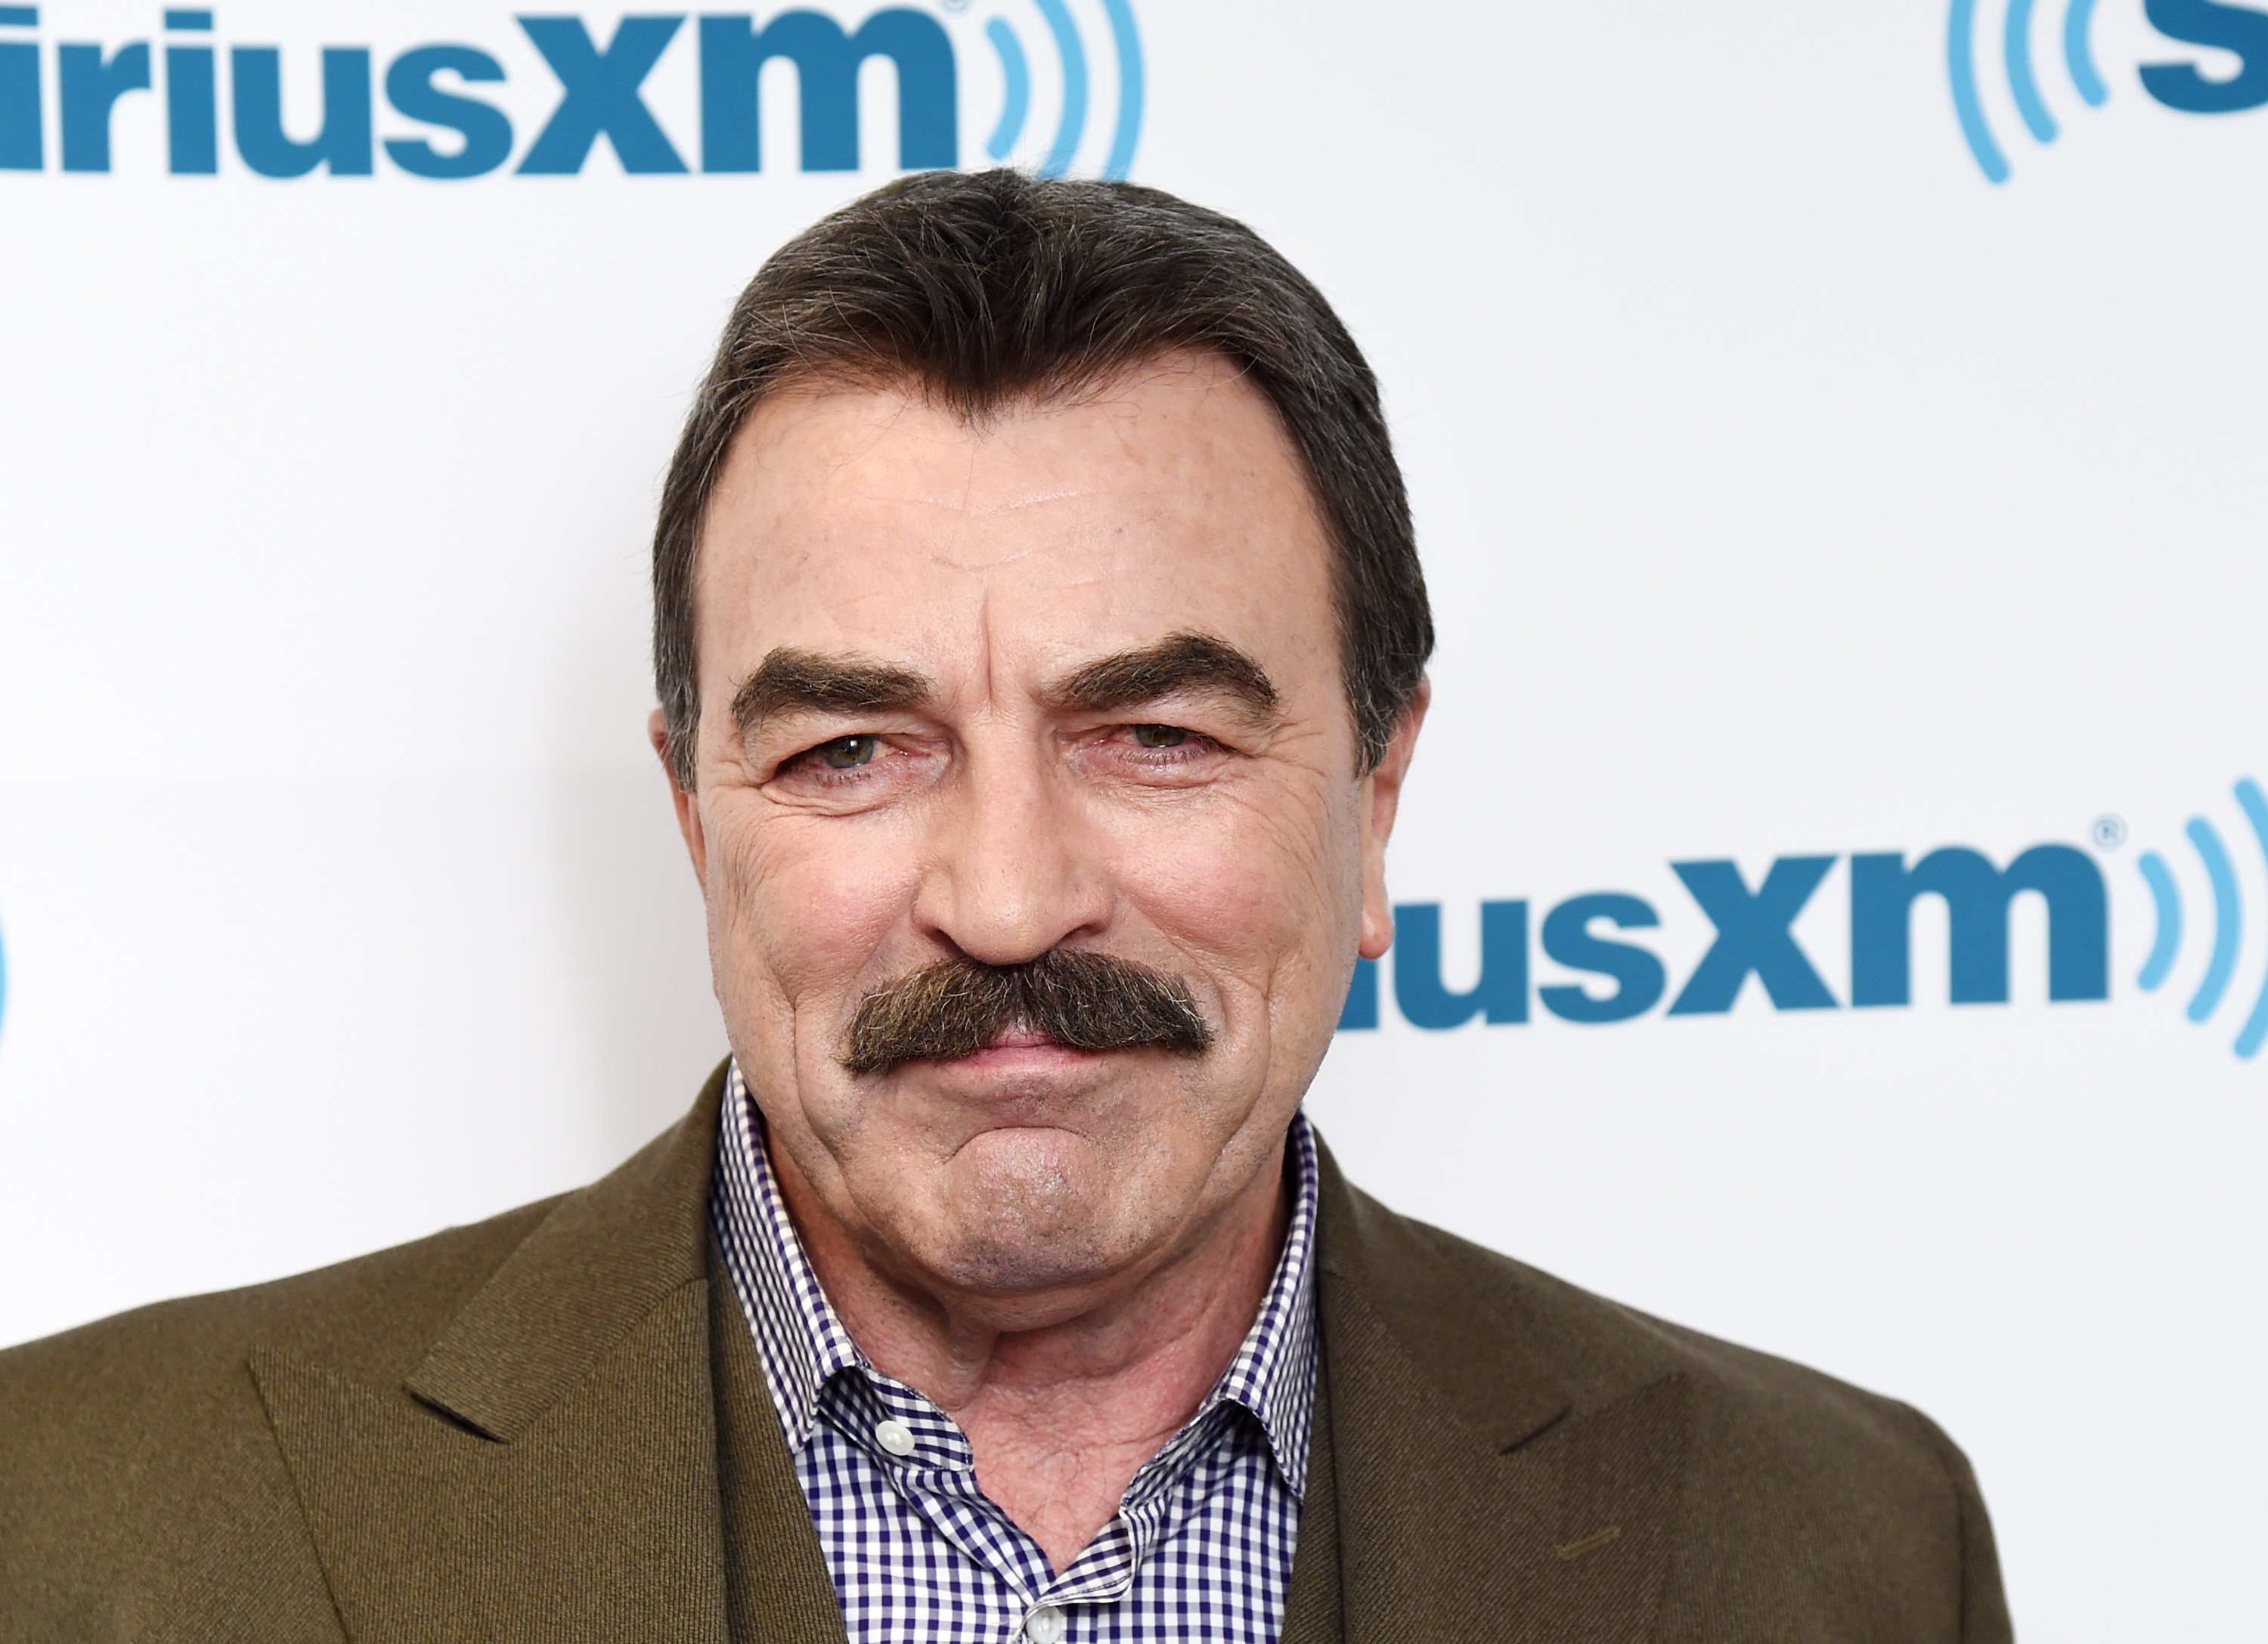 Tom Selleck visits the SiriusXM Studios on October 15, 2015 in New York City | Photo: Getty Images